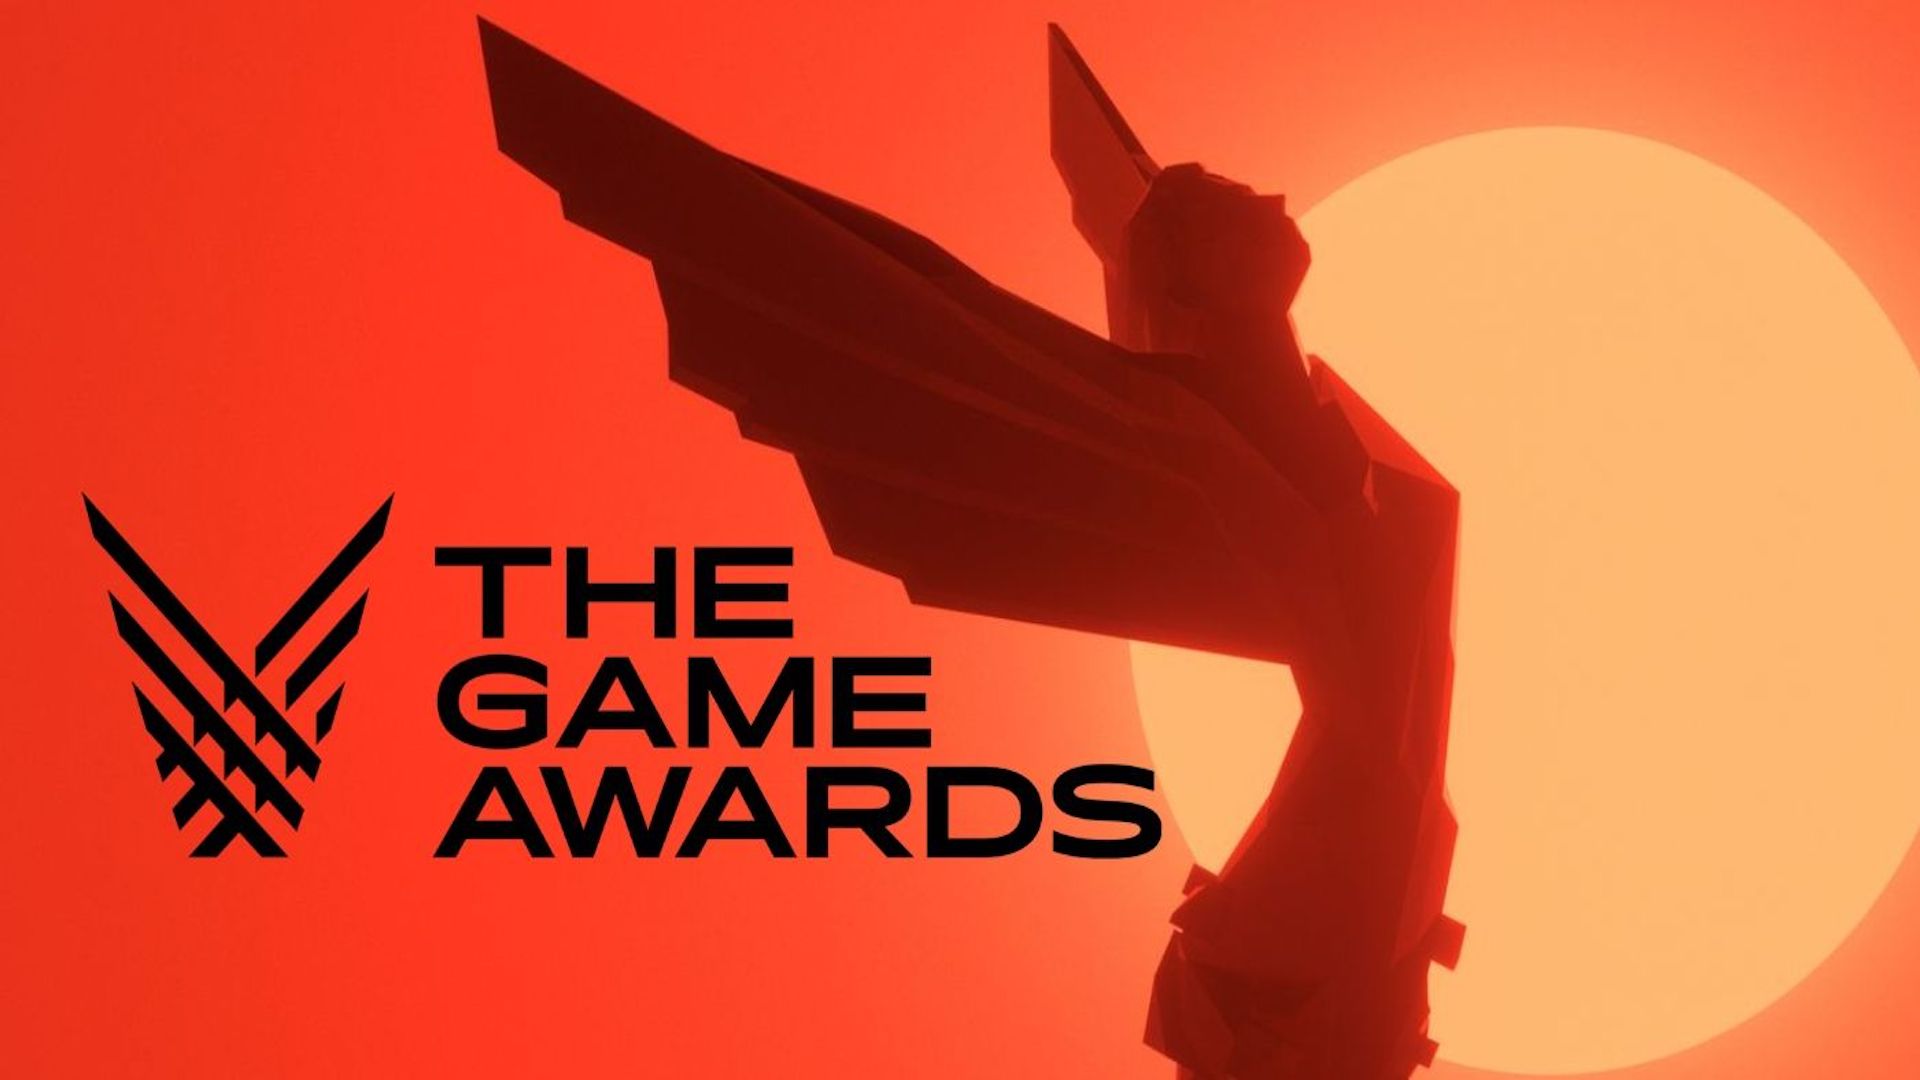 Game awards. Гейм Авардс. The game Awards. The game Awards logo. The game of the year Award 22.